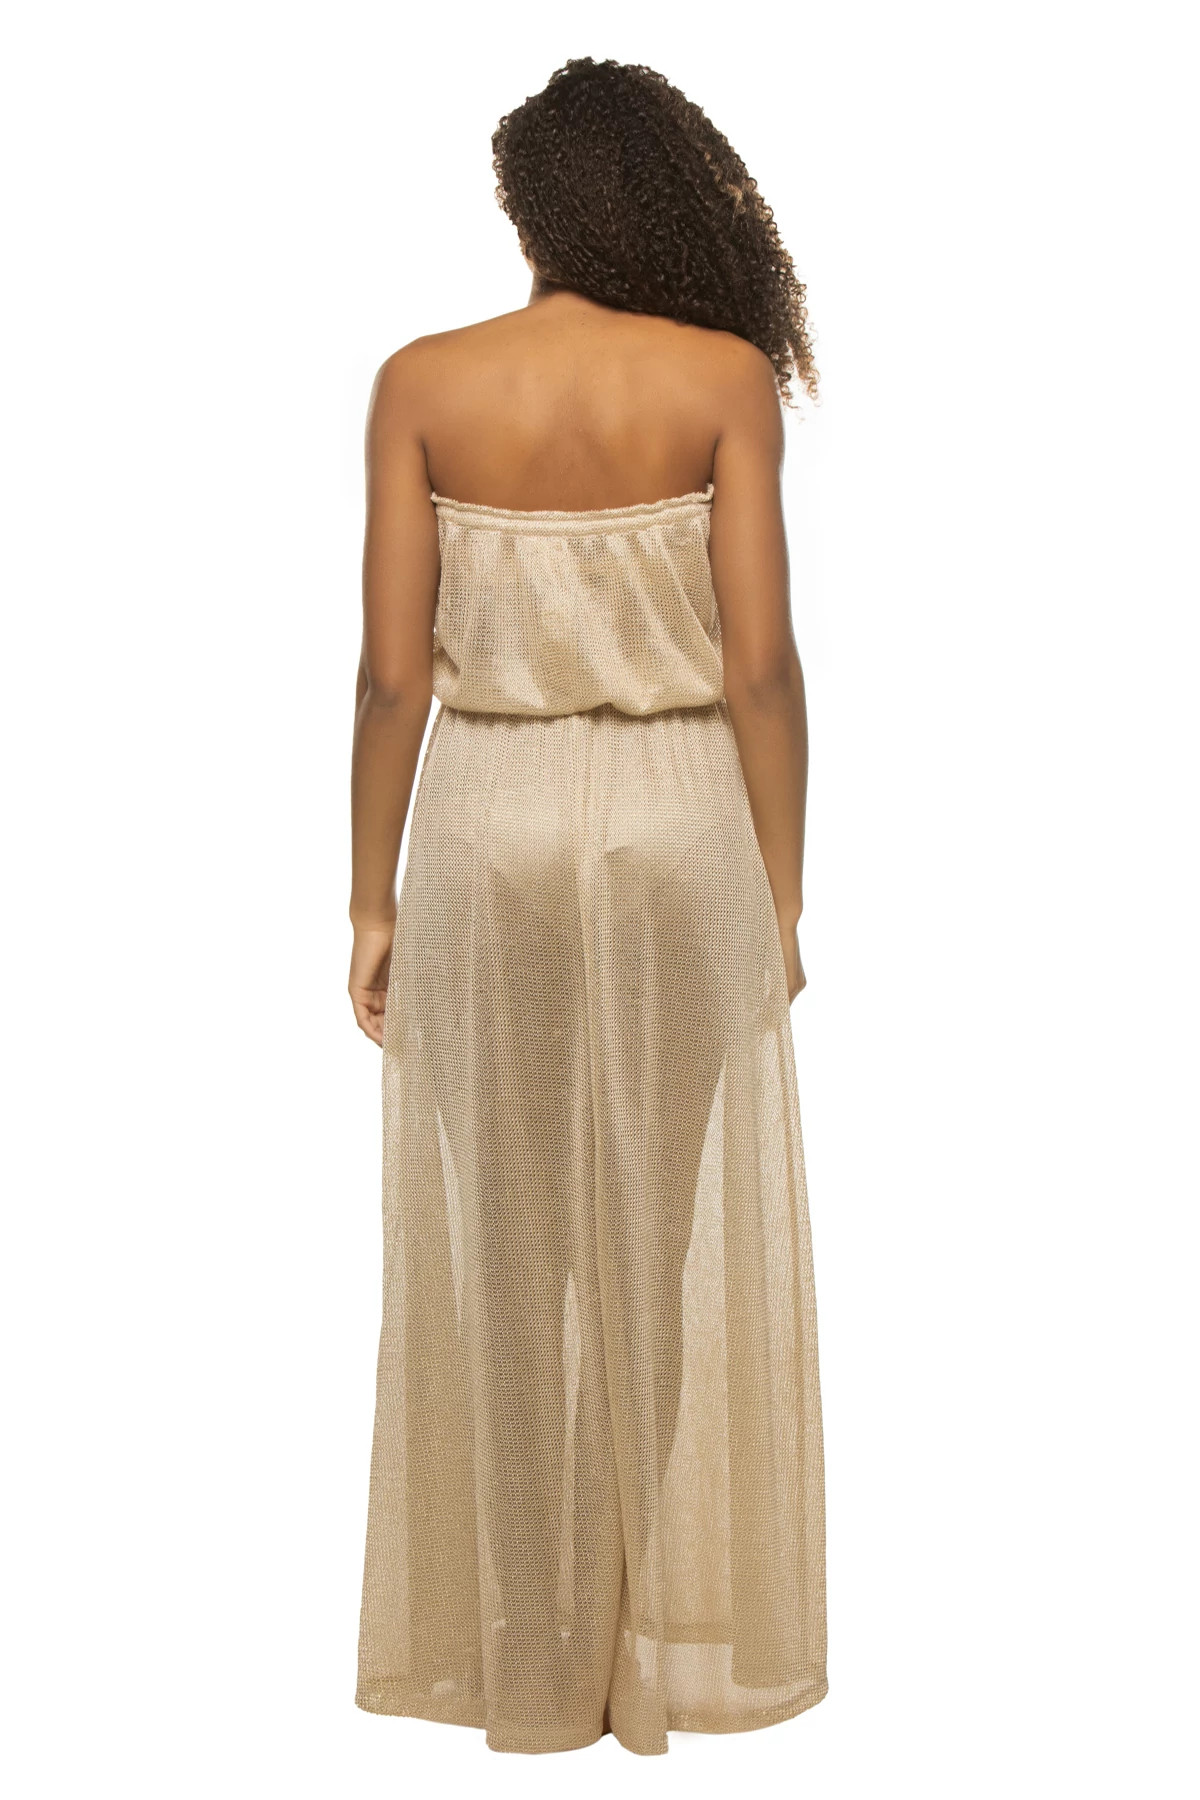 GOLD LUXE KNIT Maya Strapless Maxi Dress image number 2